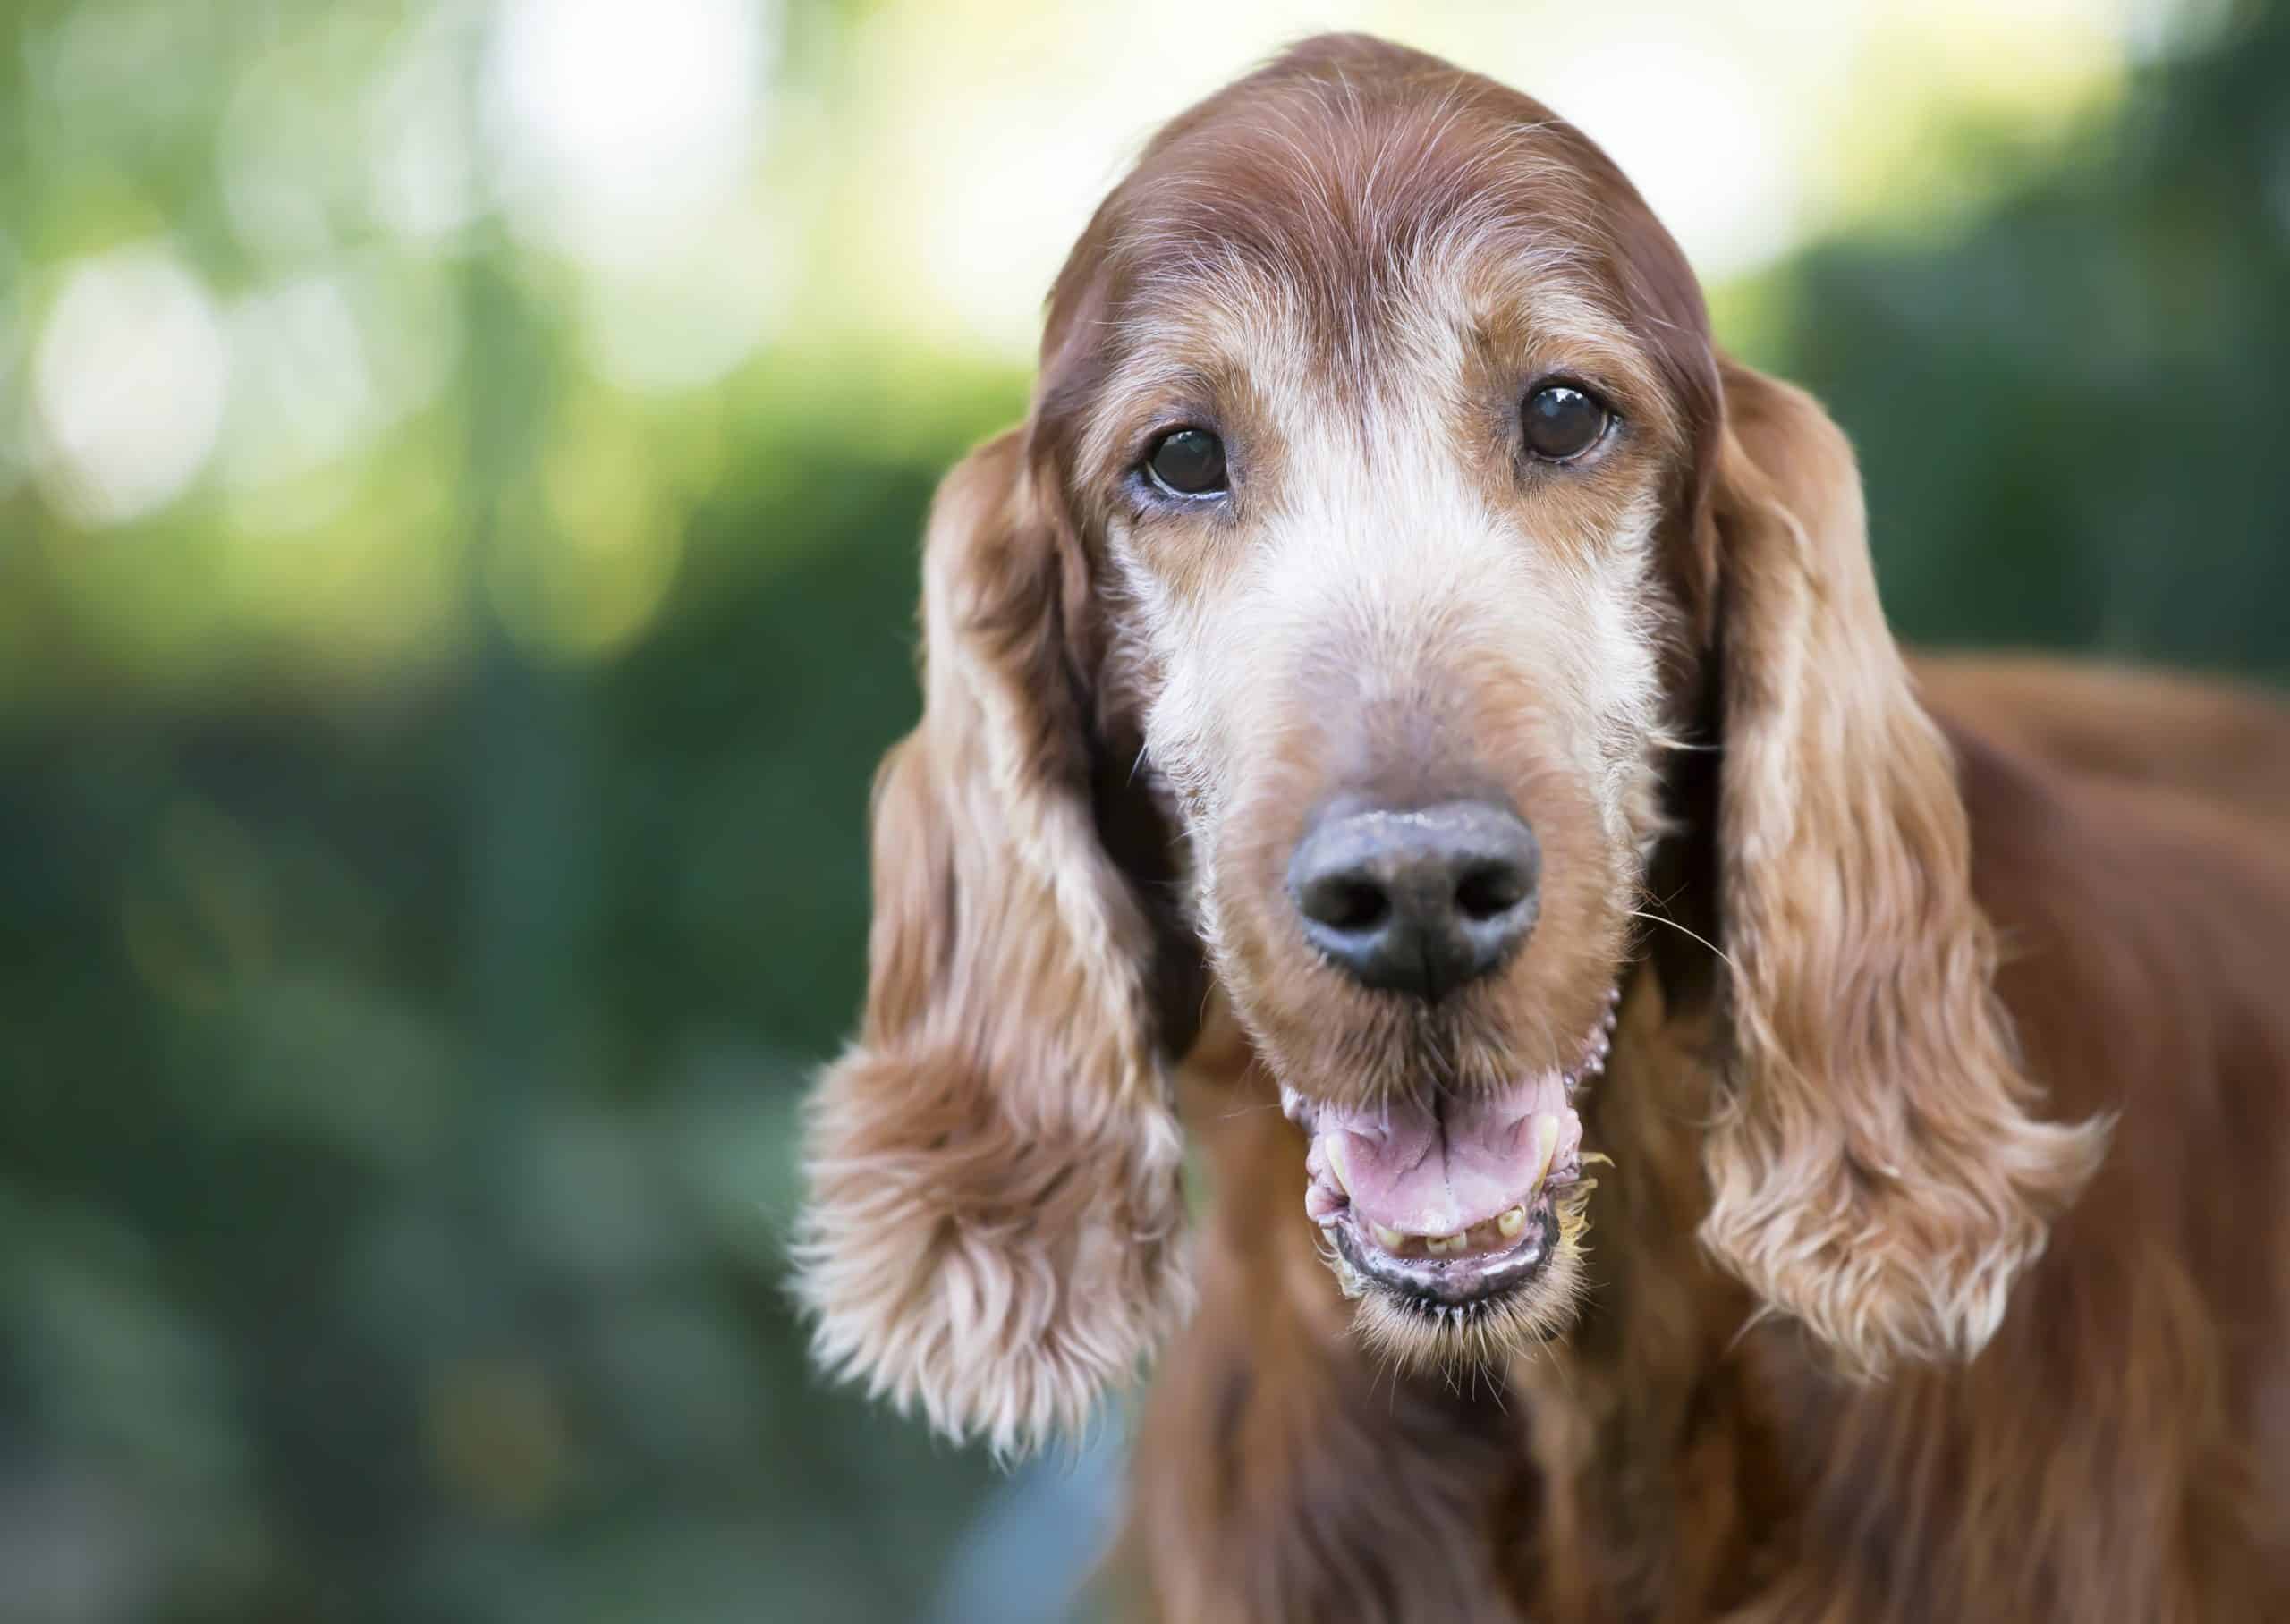 Old Irish setter. As your dog ages, their wants and needs will change, so it’s your responsibility as their owner to make relevant changes to provide senior dog care to keep your canine friend happy and mobile.